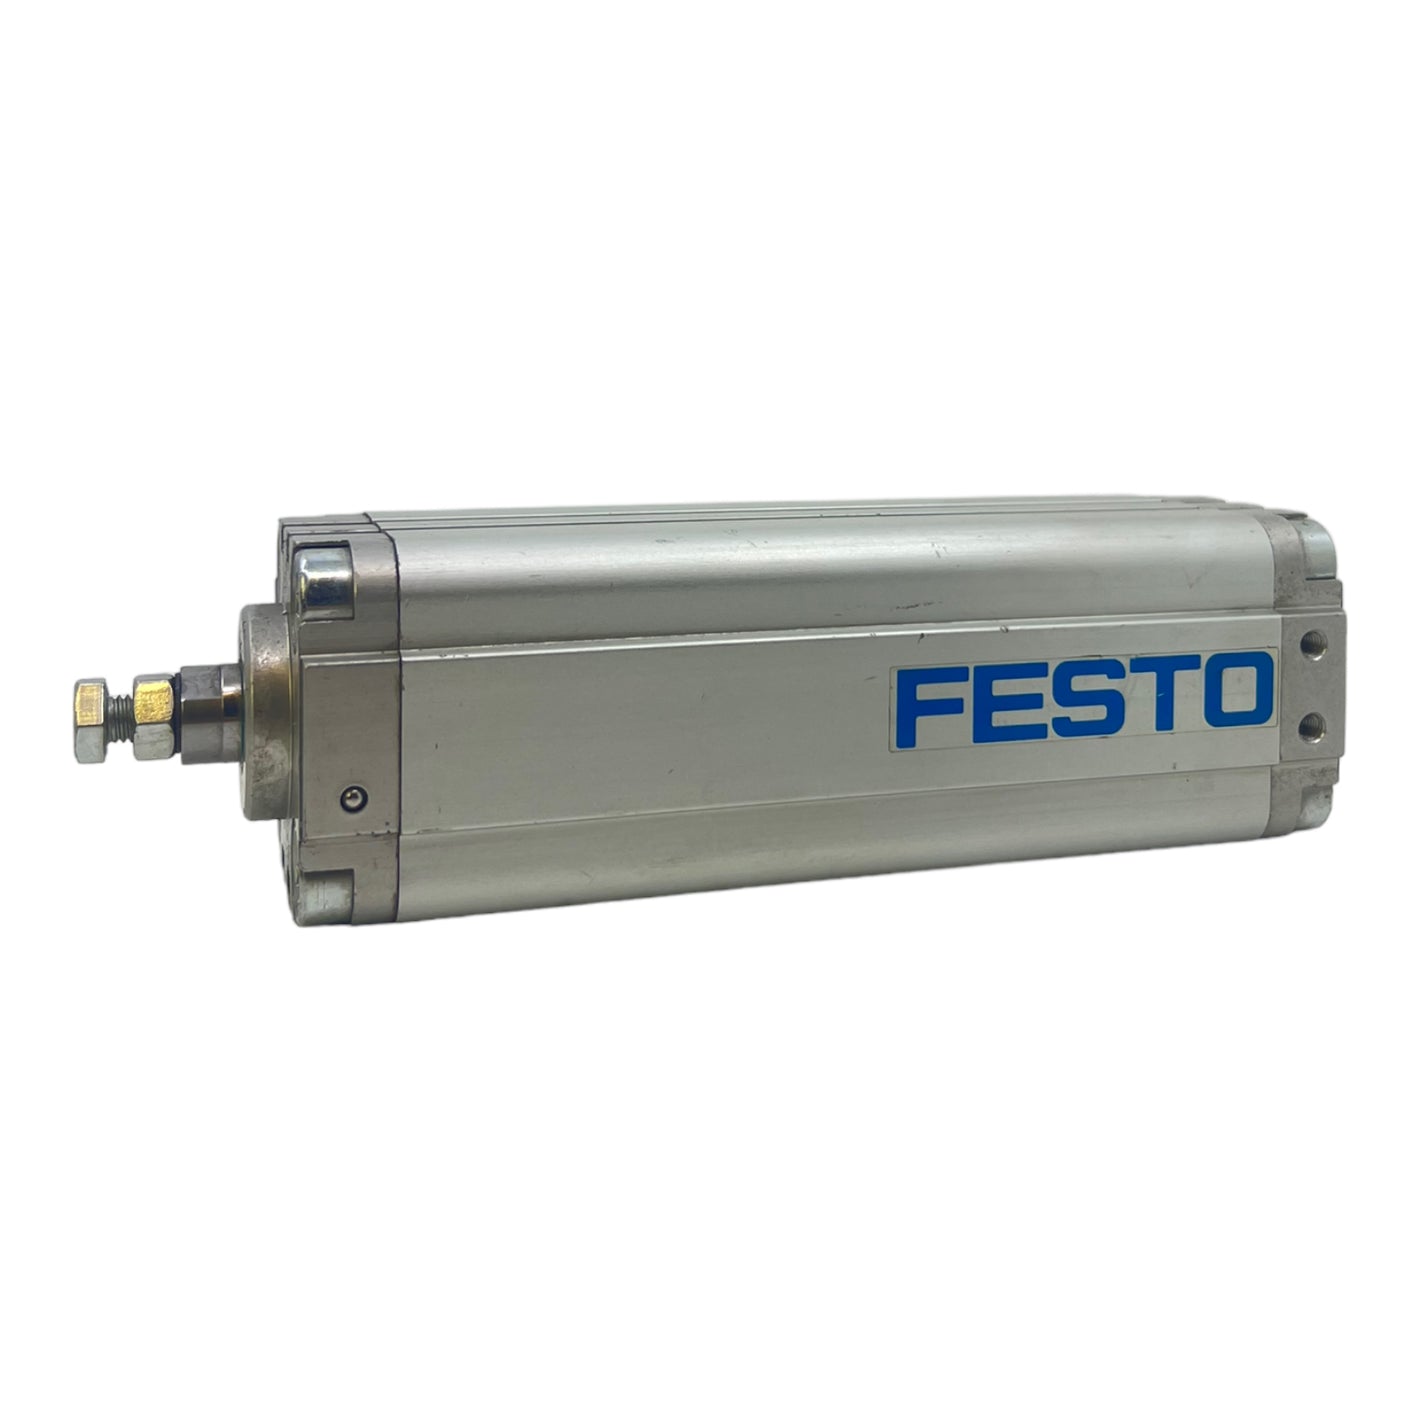 Festo ADVU-40-130-PA-S1 compact cylinder 161156 0.8 to 10 bar double-acting 